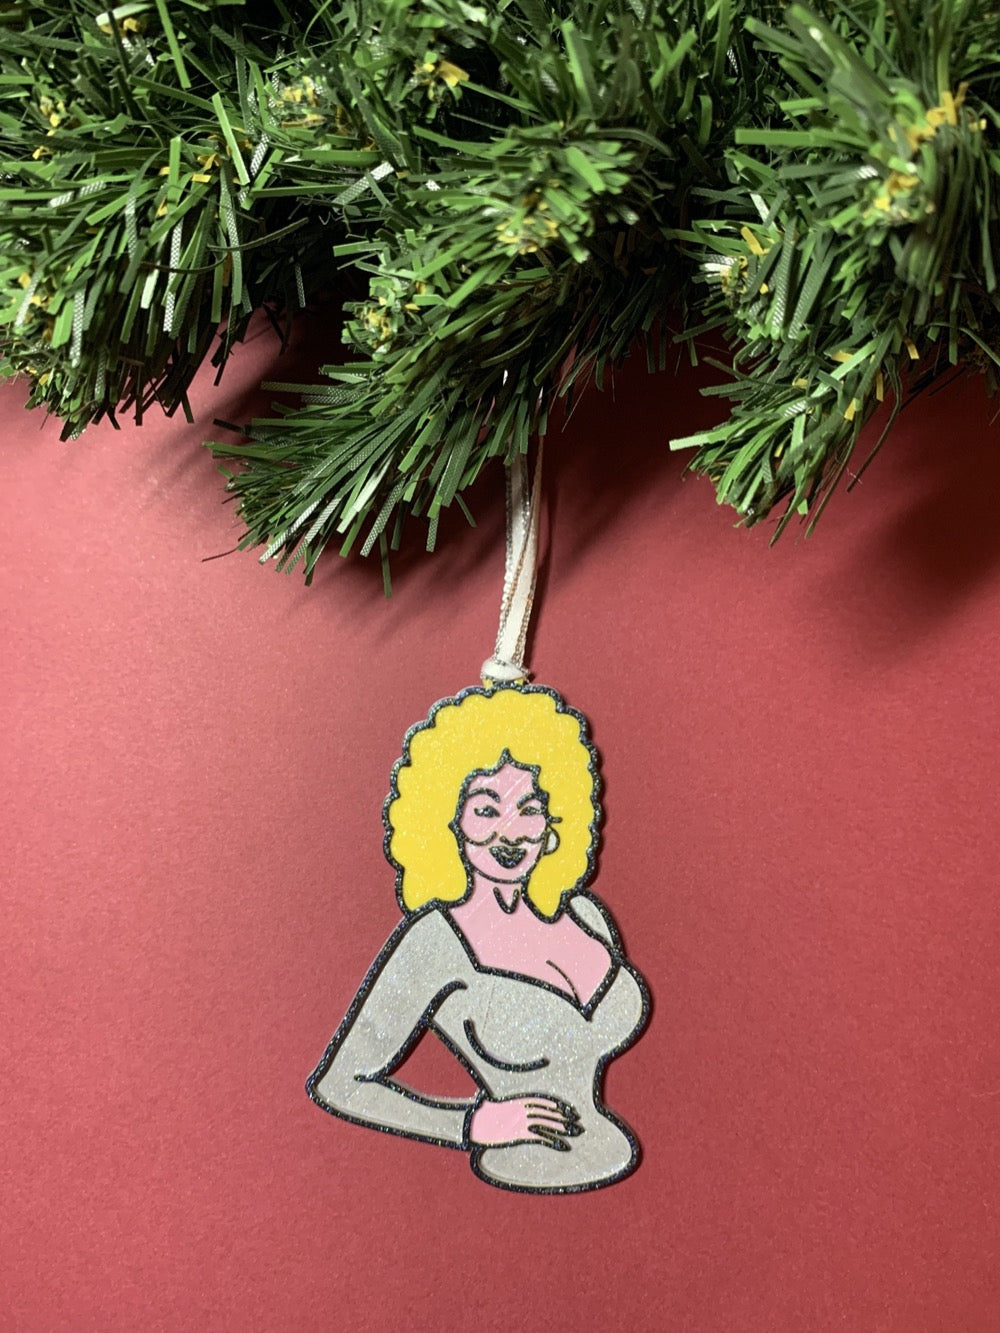 On a red background with a green wreath above is a R+D 3D printed ornament. This ornament is shaped like Dolly Parton. You can see one hand resting on her hip as she wears a silver top. Her trademark neckline and big blond hair is also visible with a smile. The entire ornament is covered in glitter to be able to shimmer and shine in the light.